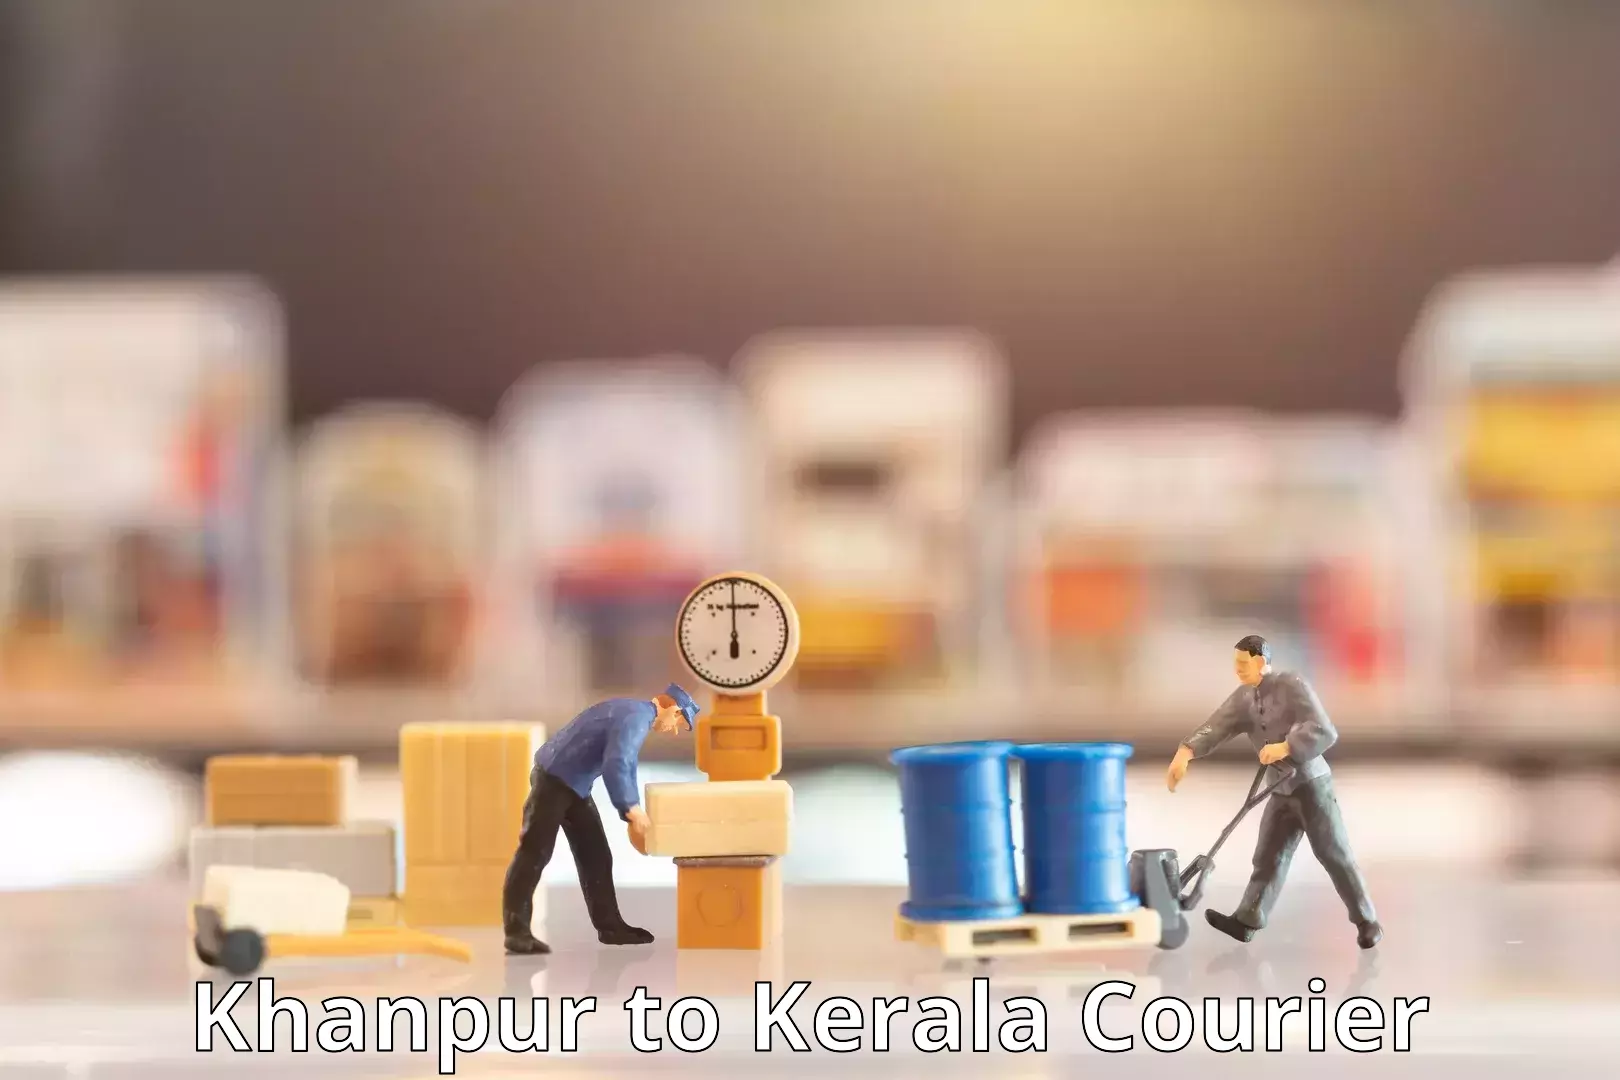 Reliable delivery network Khanpur to Cochin Port Kochi